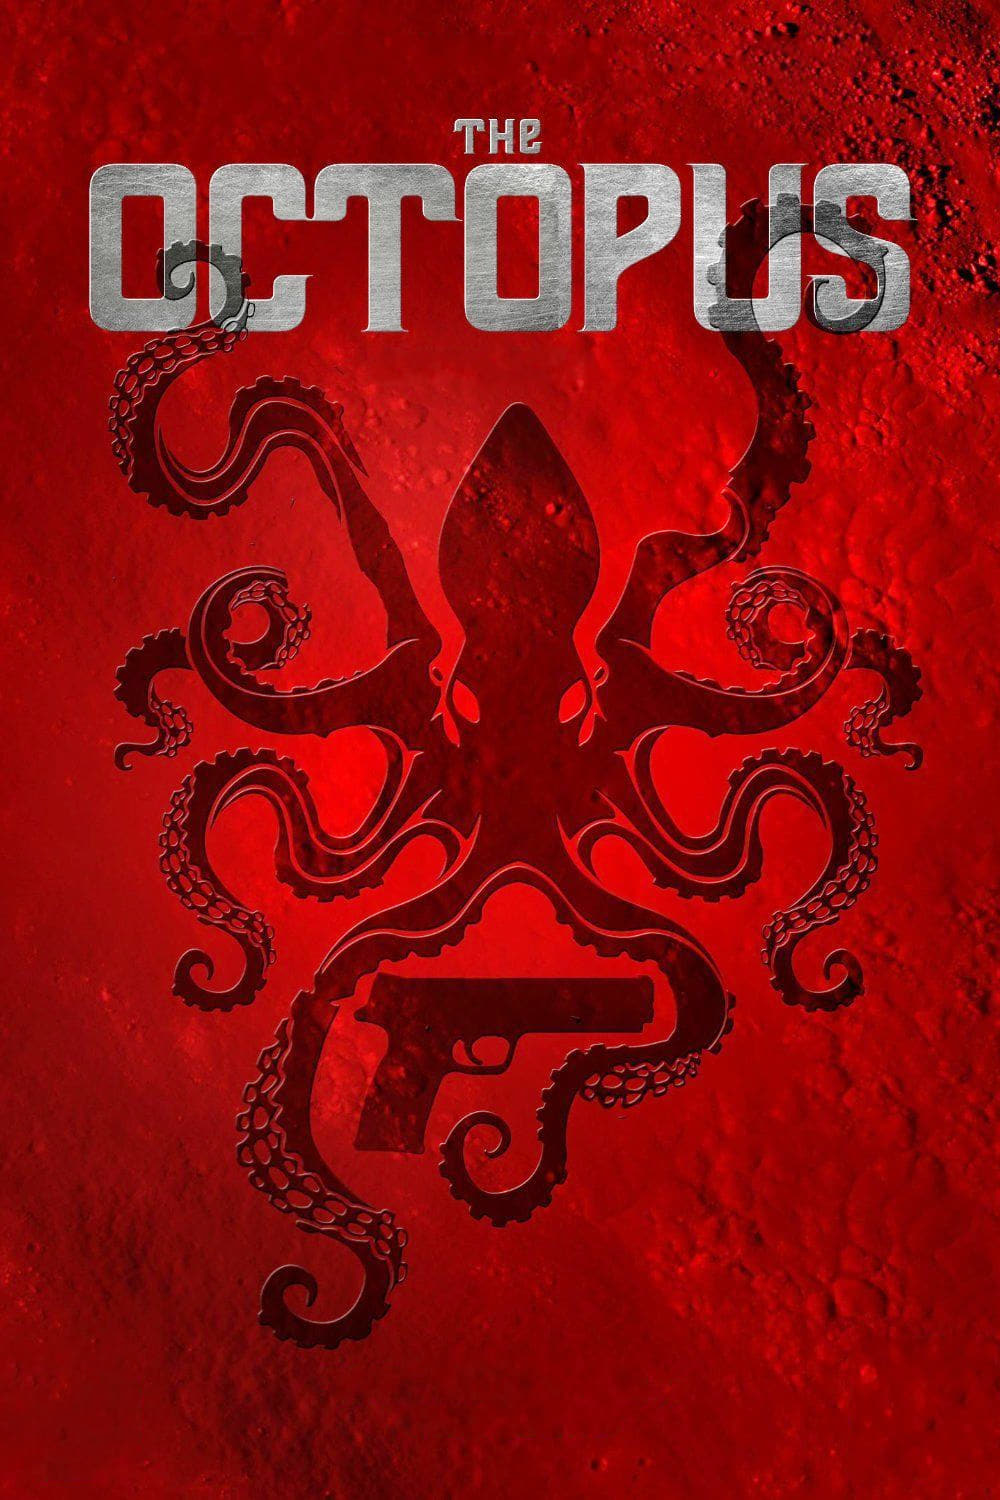 The Octopus (1984)